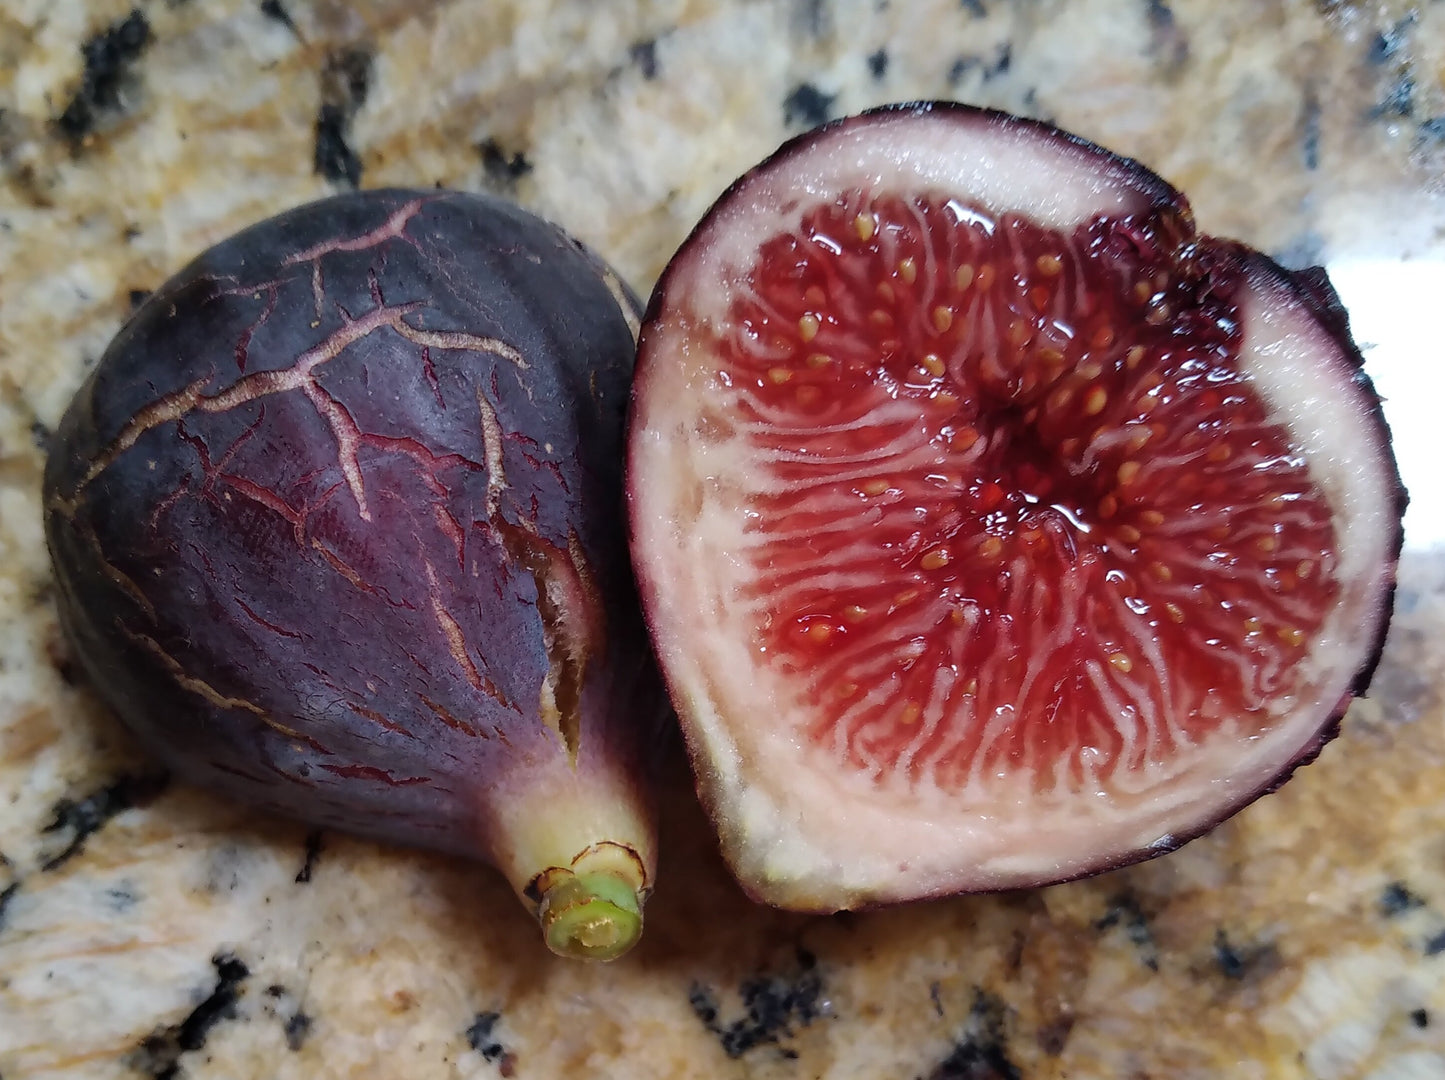 Negra d' Agde Fig Tree - 2 Cuttings - Tasty Purple French Fig Variety